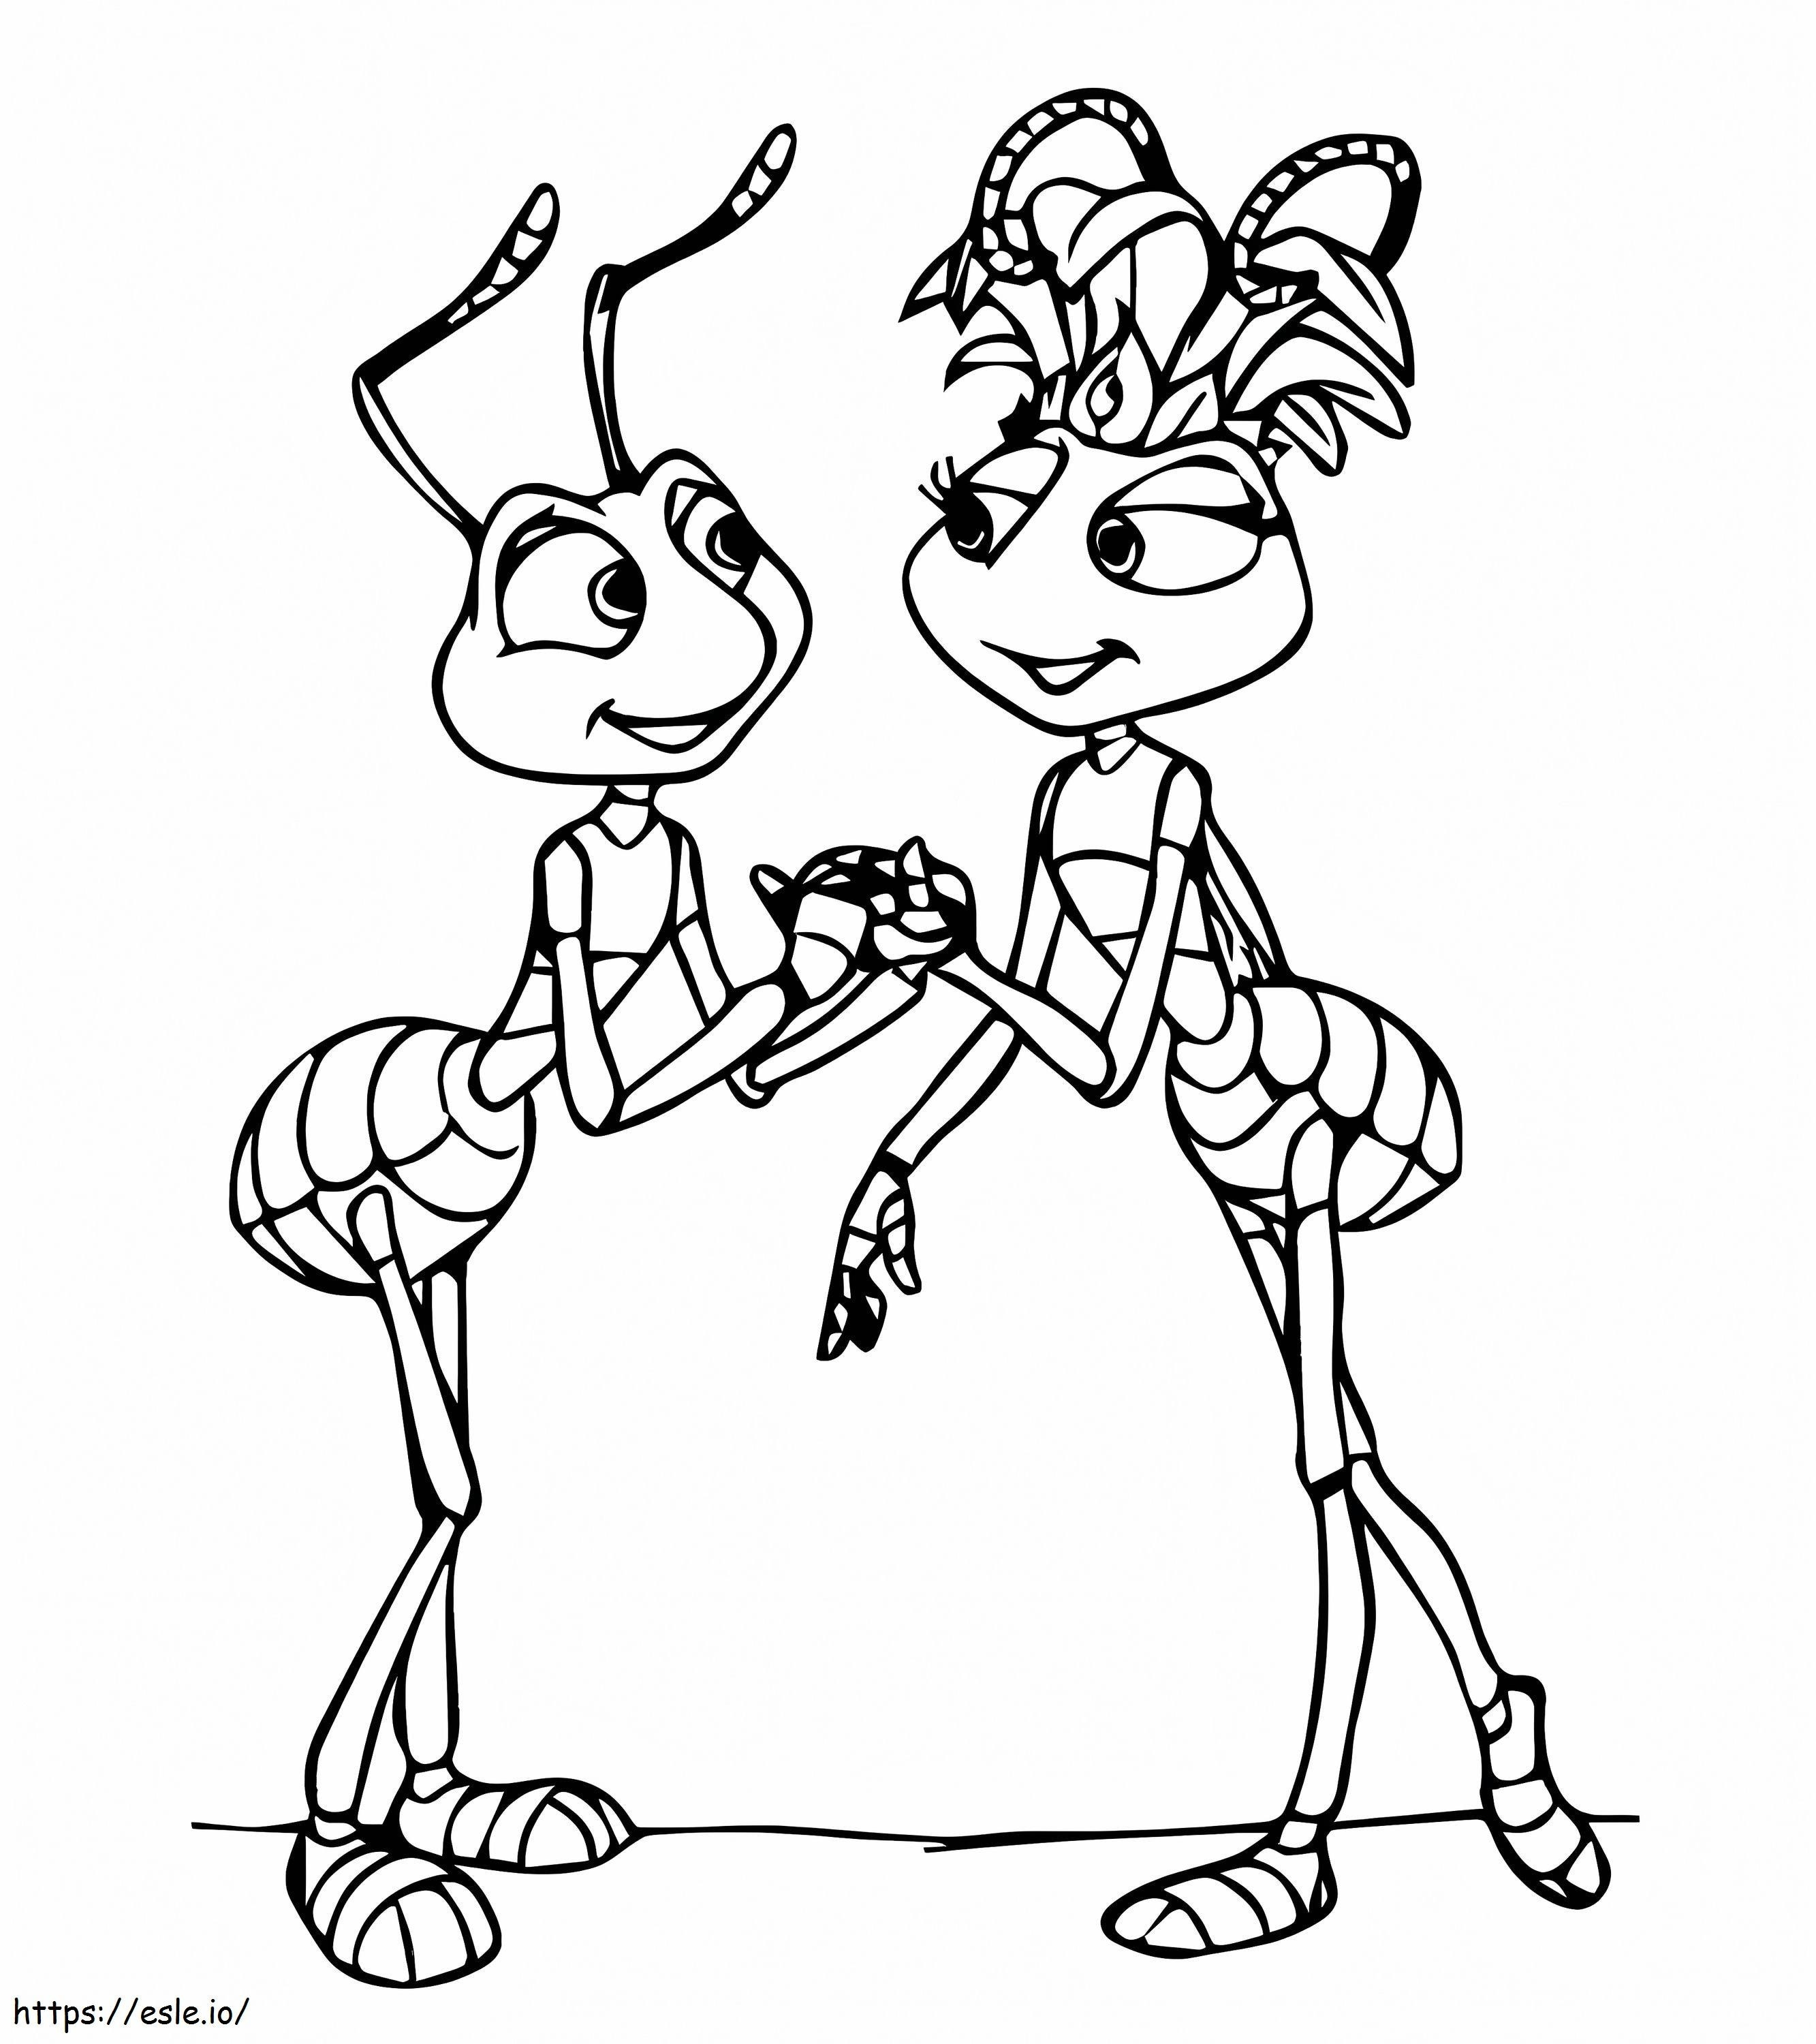 Couple Of Ants coloring page